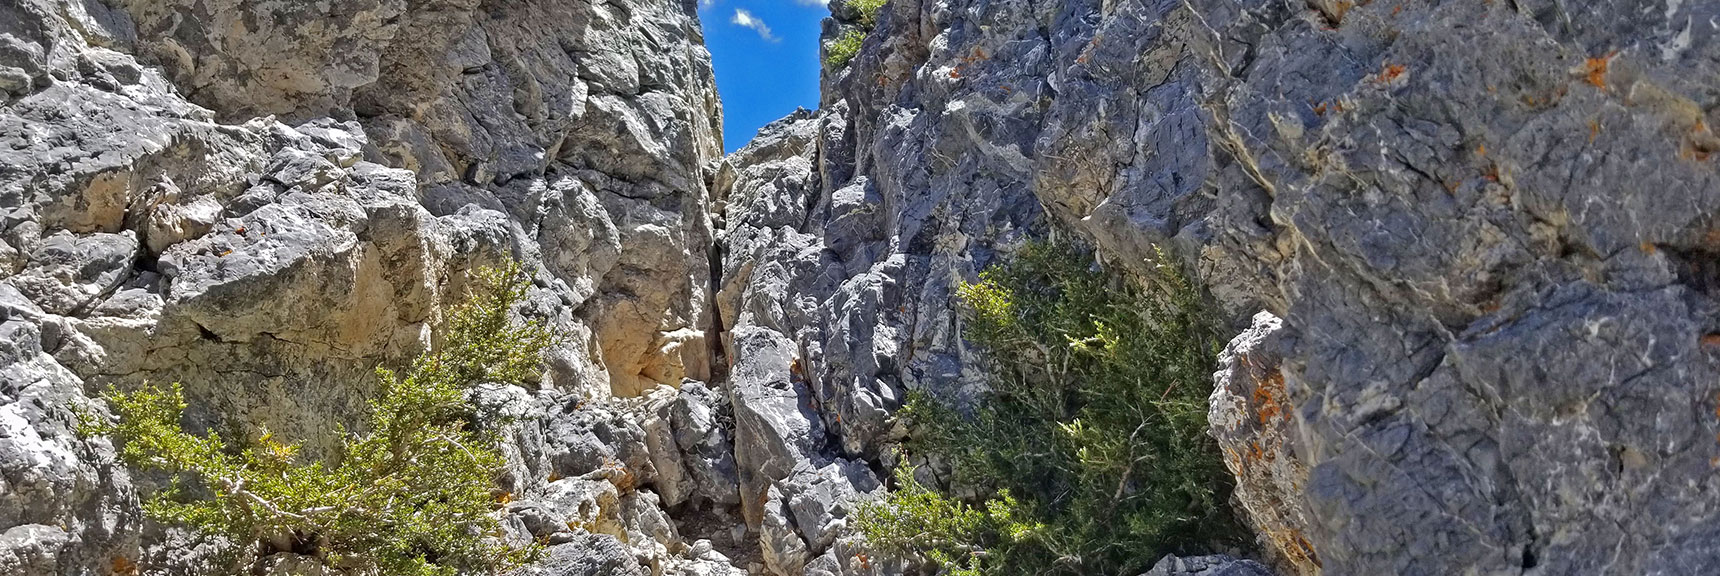 2nd Class 3 Summit Approach on NW Side of Black Rock Sister | Black Rock Sister | Mt Charleston Wilderness | Lee Canyon | Spring Mountains, Nevada